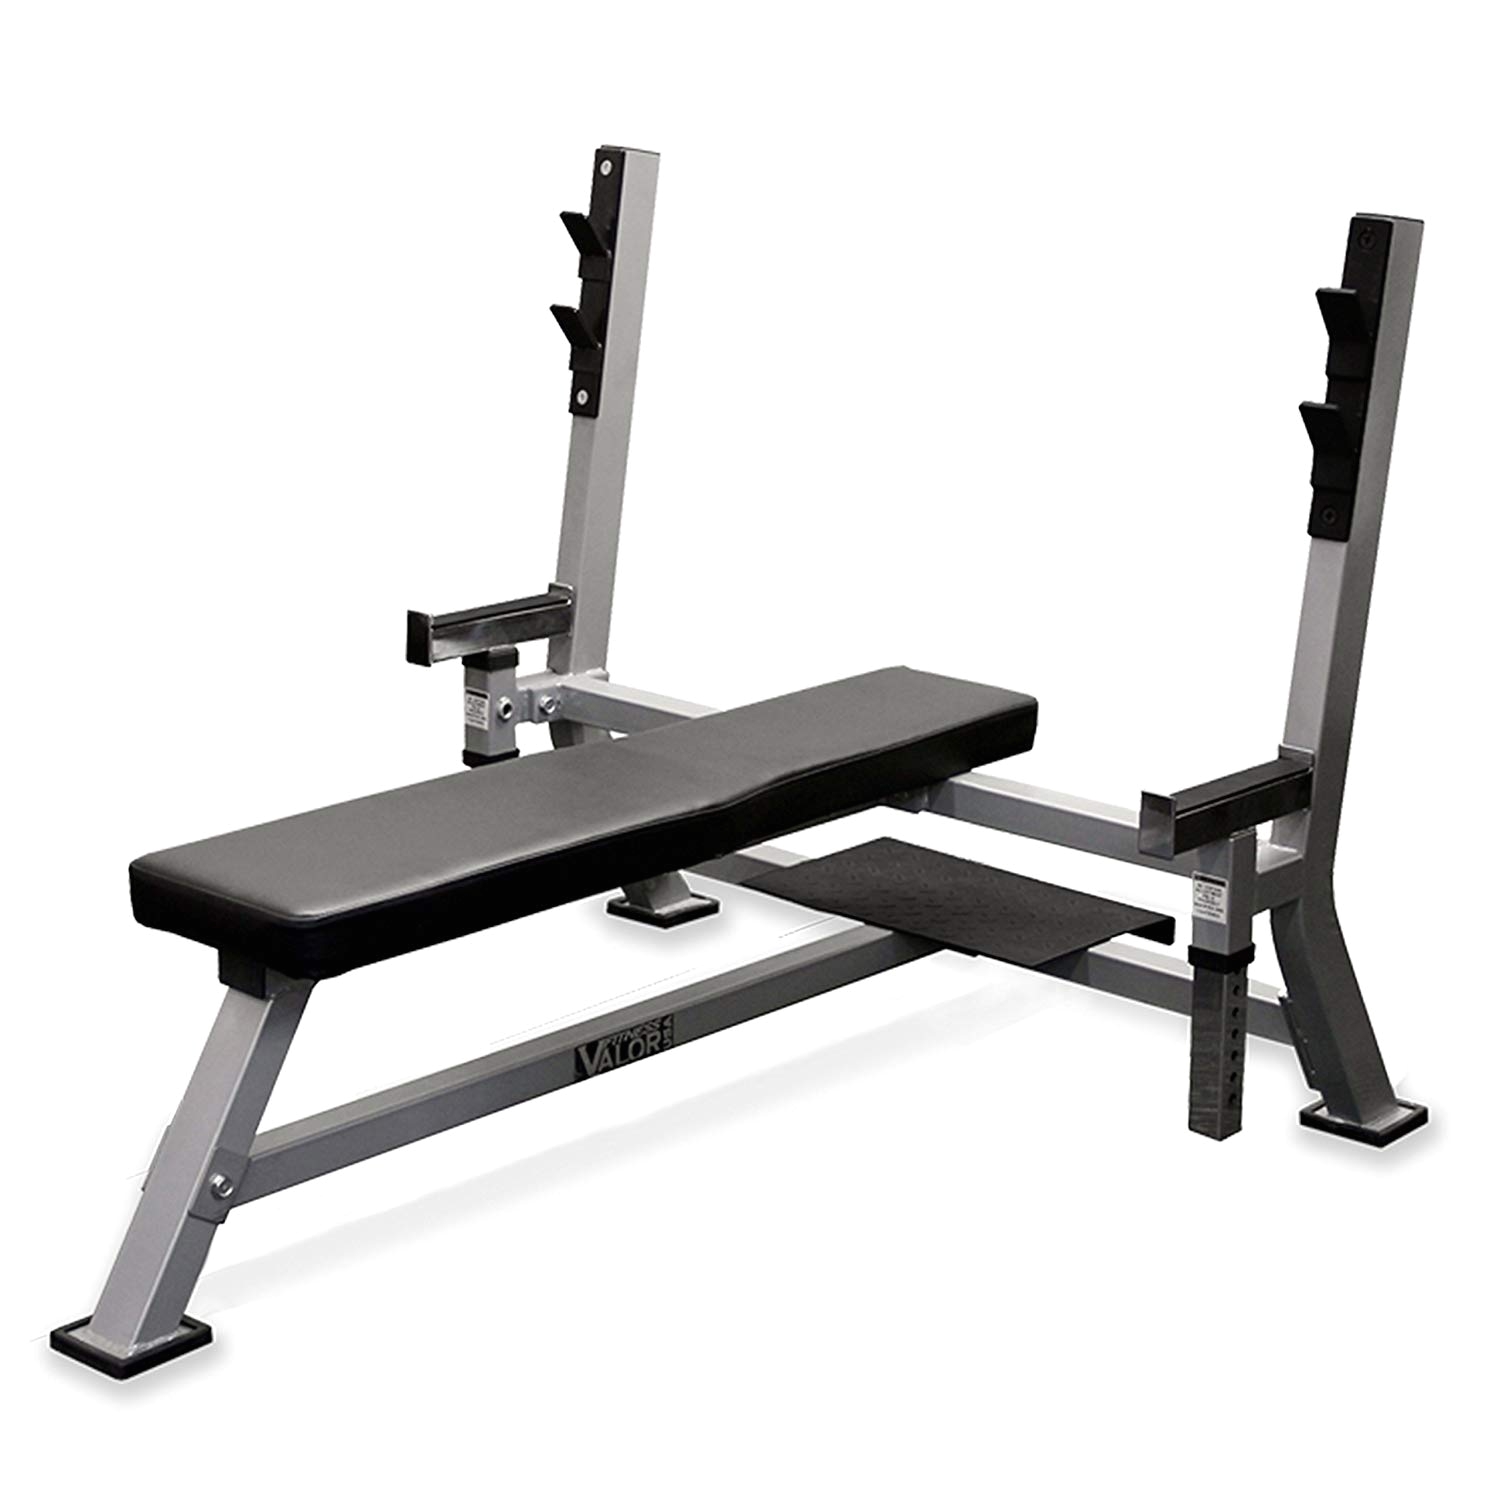 amazon com valor fitness bf 48 olympic bench pro with spotter olympic weight benches sports outdoors